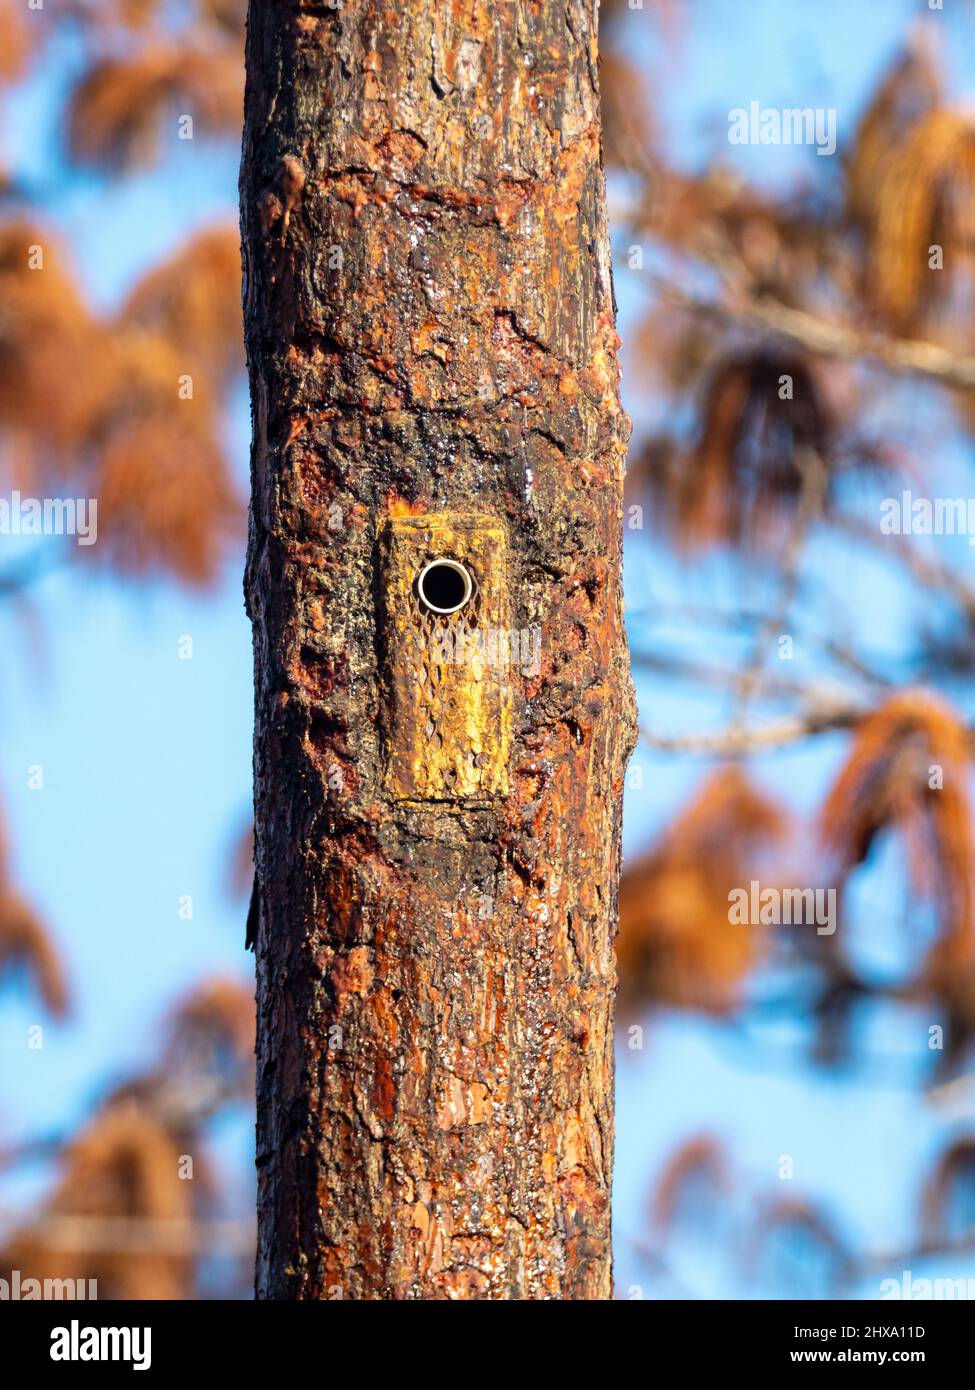 red-cockaded woodpecker, Leuconotopicus borealis, nest box in the pinelands of Floral city, Florida Stock Photo